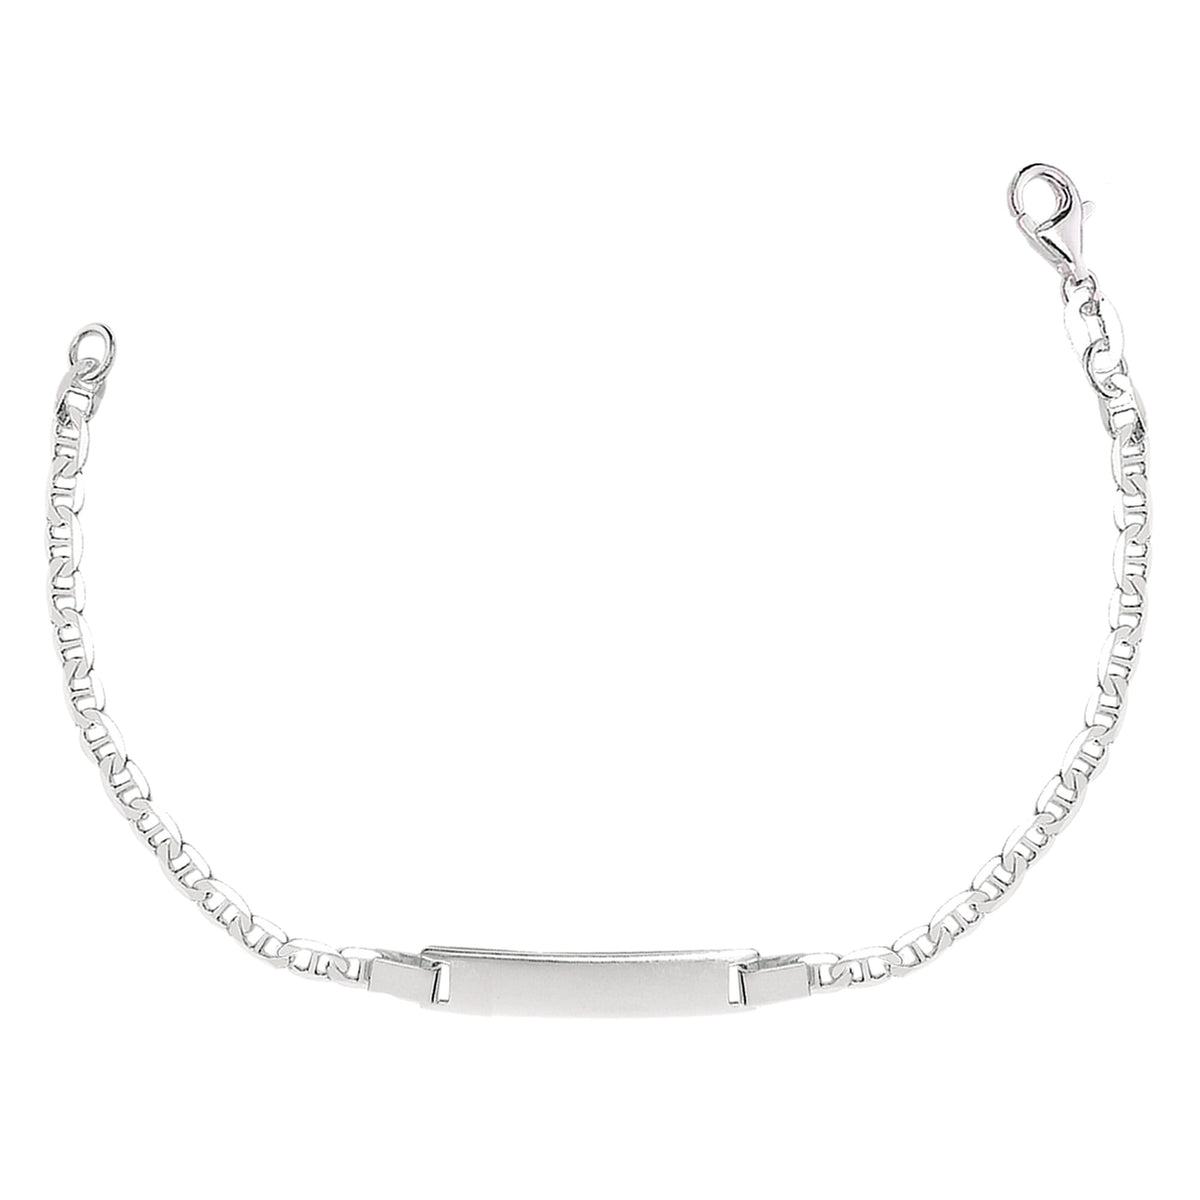 Mariner Chain Baby Id Bracelet In Sterling Silver - 6 Inches - JewelryAffairs
 - 1